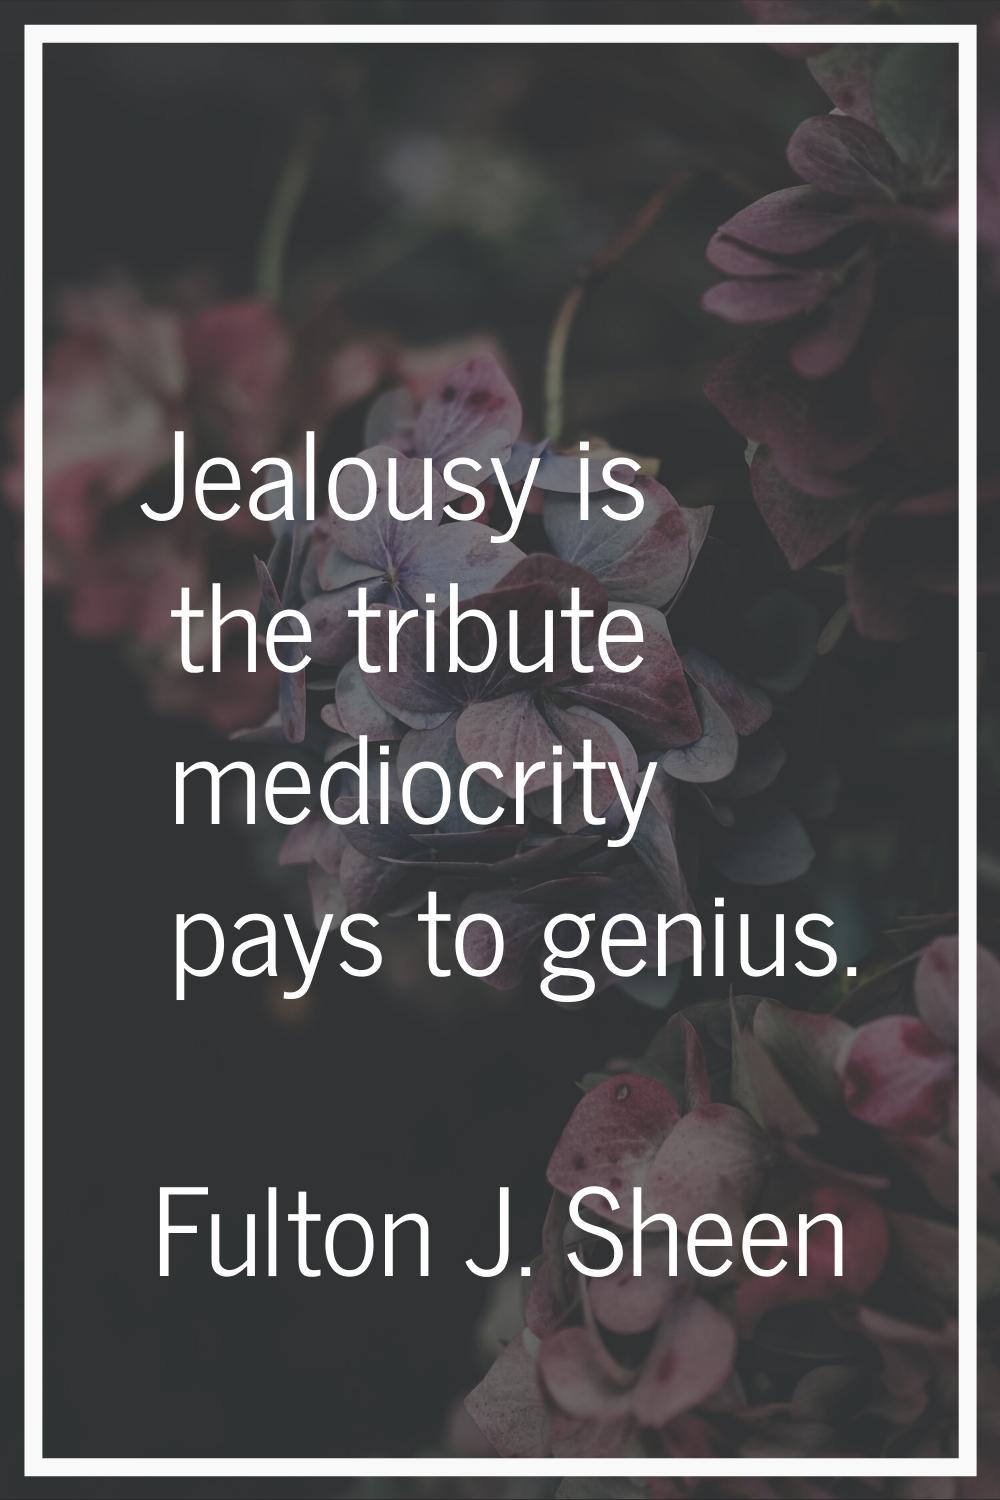 Jealousy is the tribute mediocrity pays to genius.